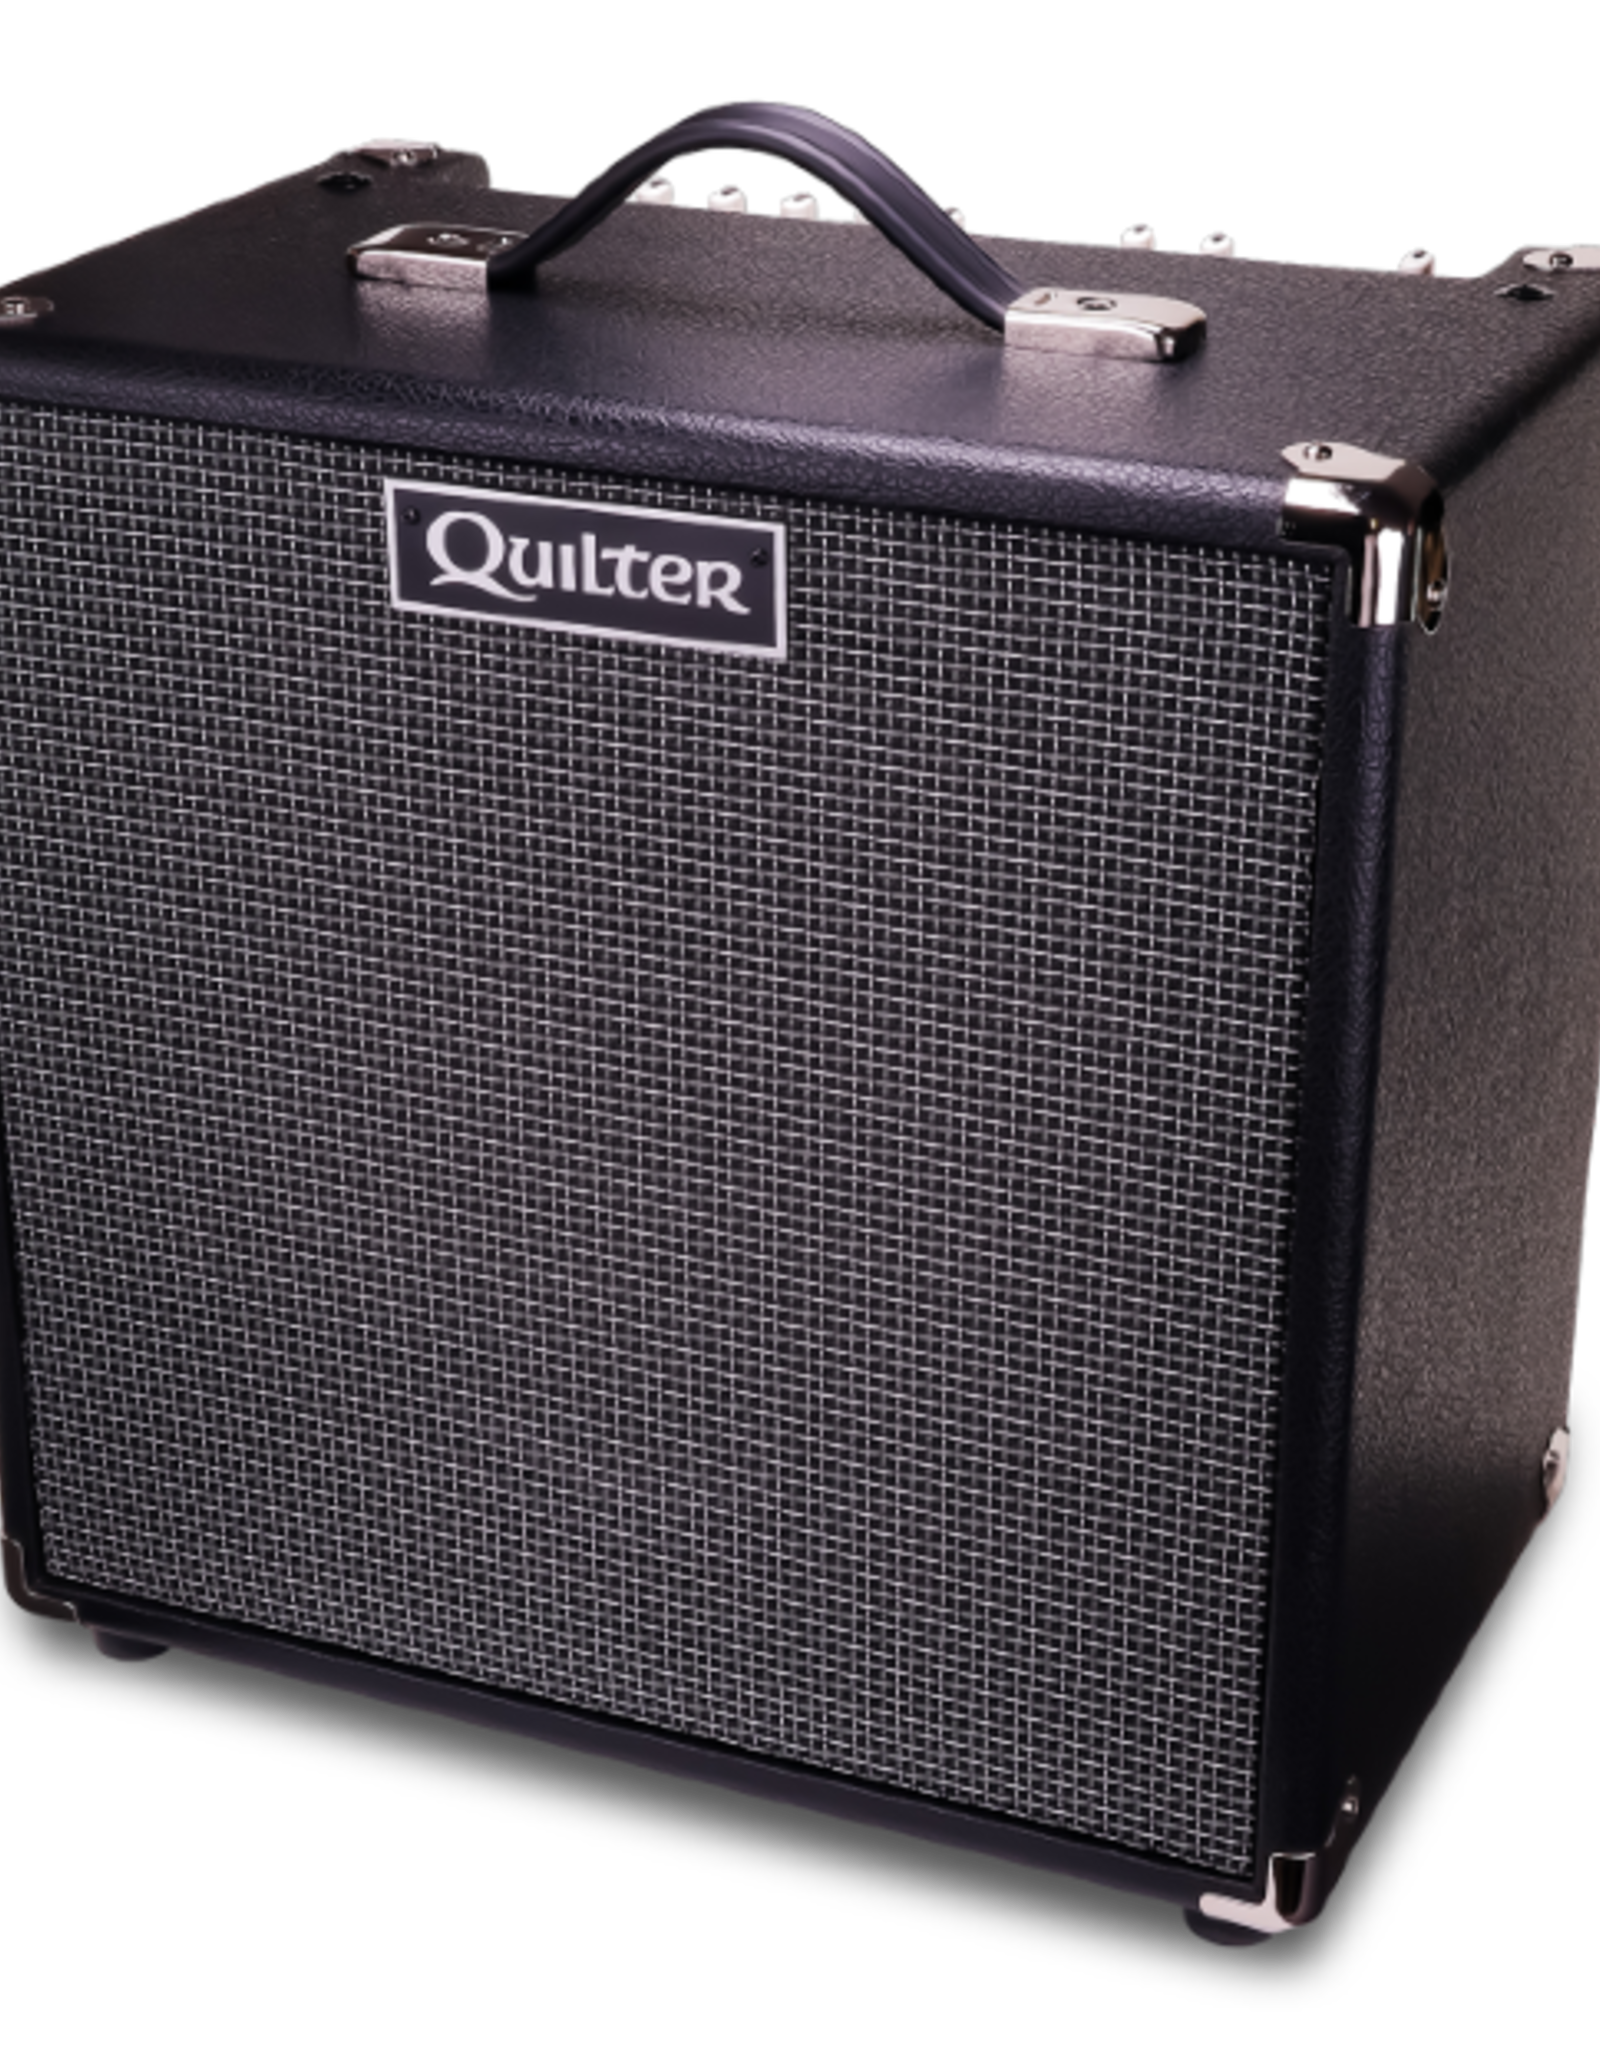 Quilter Quilter Aviator Cub Tweed, Blonde, and Blackface 1x12 Combo Amp